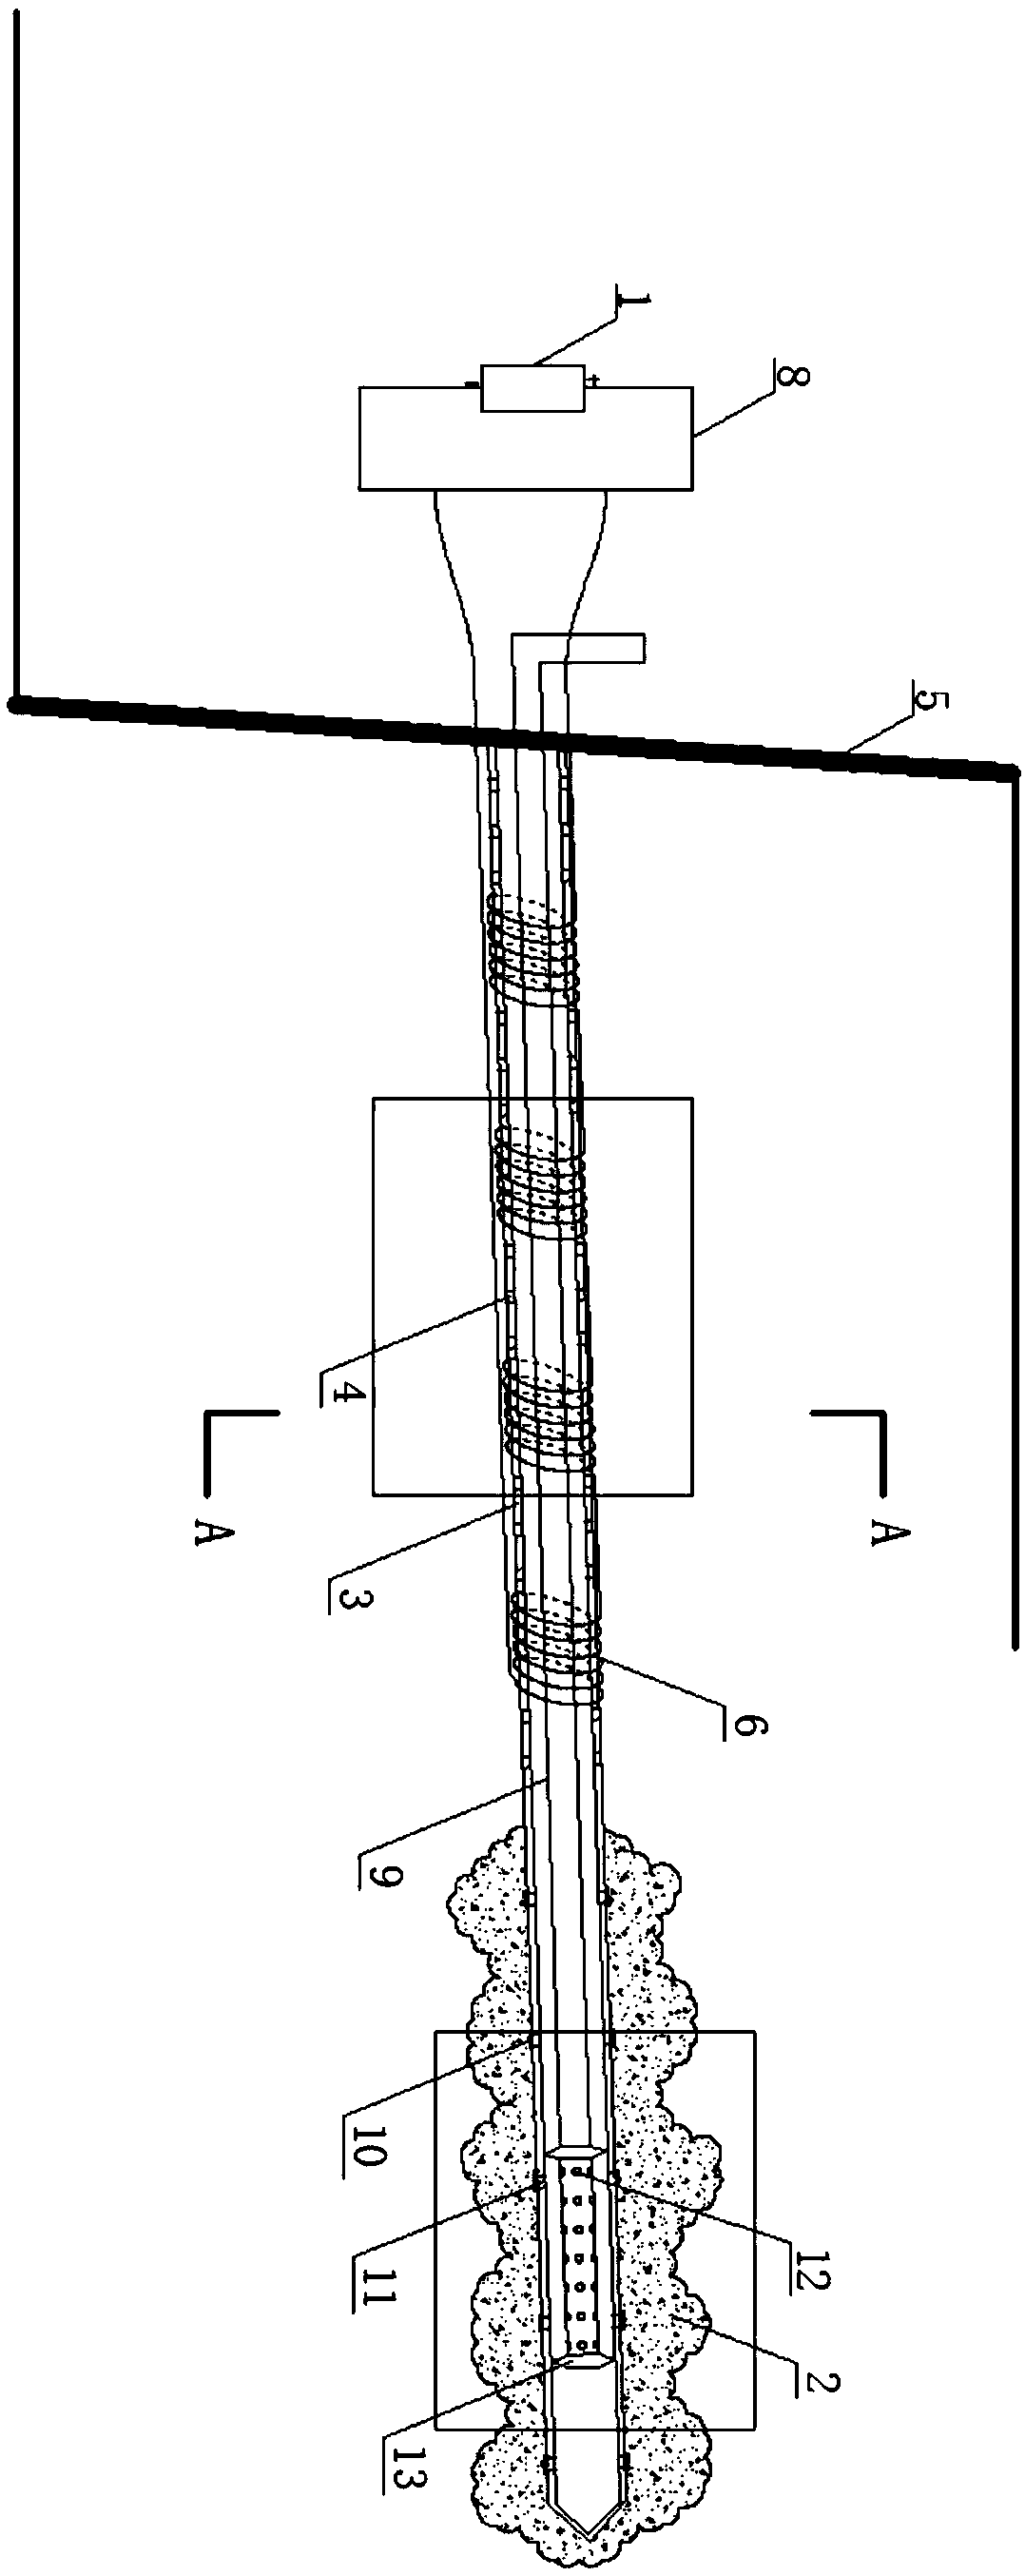 A sleeve valve pipe grouting drainage soil nail support device and its construction method